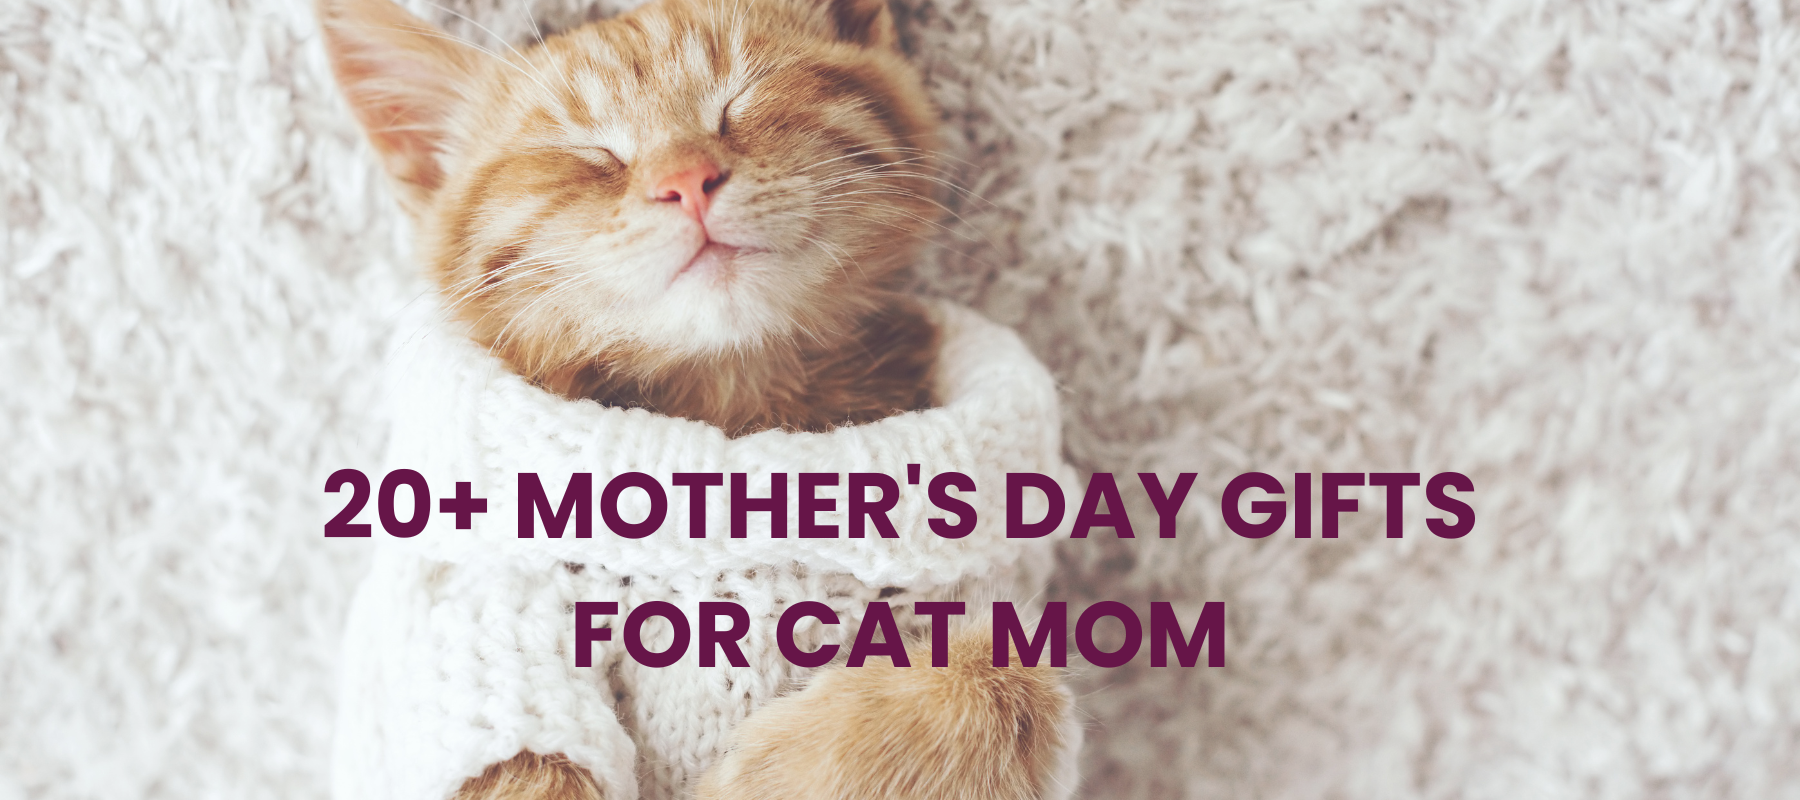 Best 20+ Mother’s Day Gifts for Cat Moms & Cat Lovers